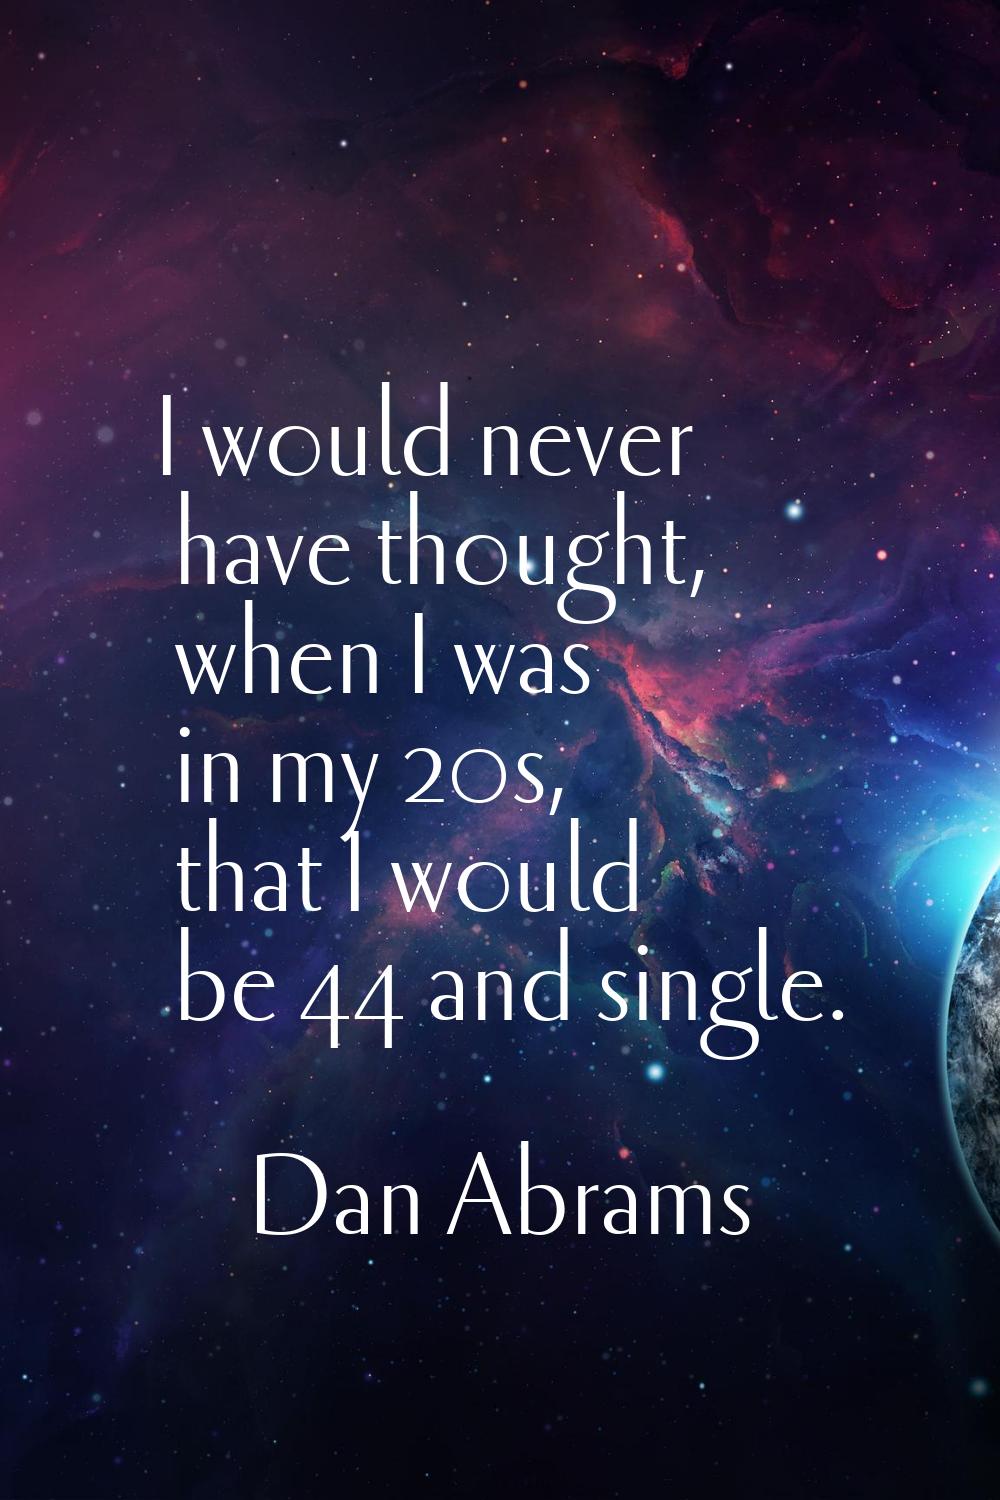 I would never have thought, when I was in my 20s, that I would be 44 and single.